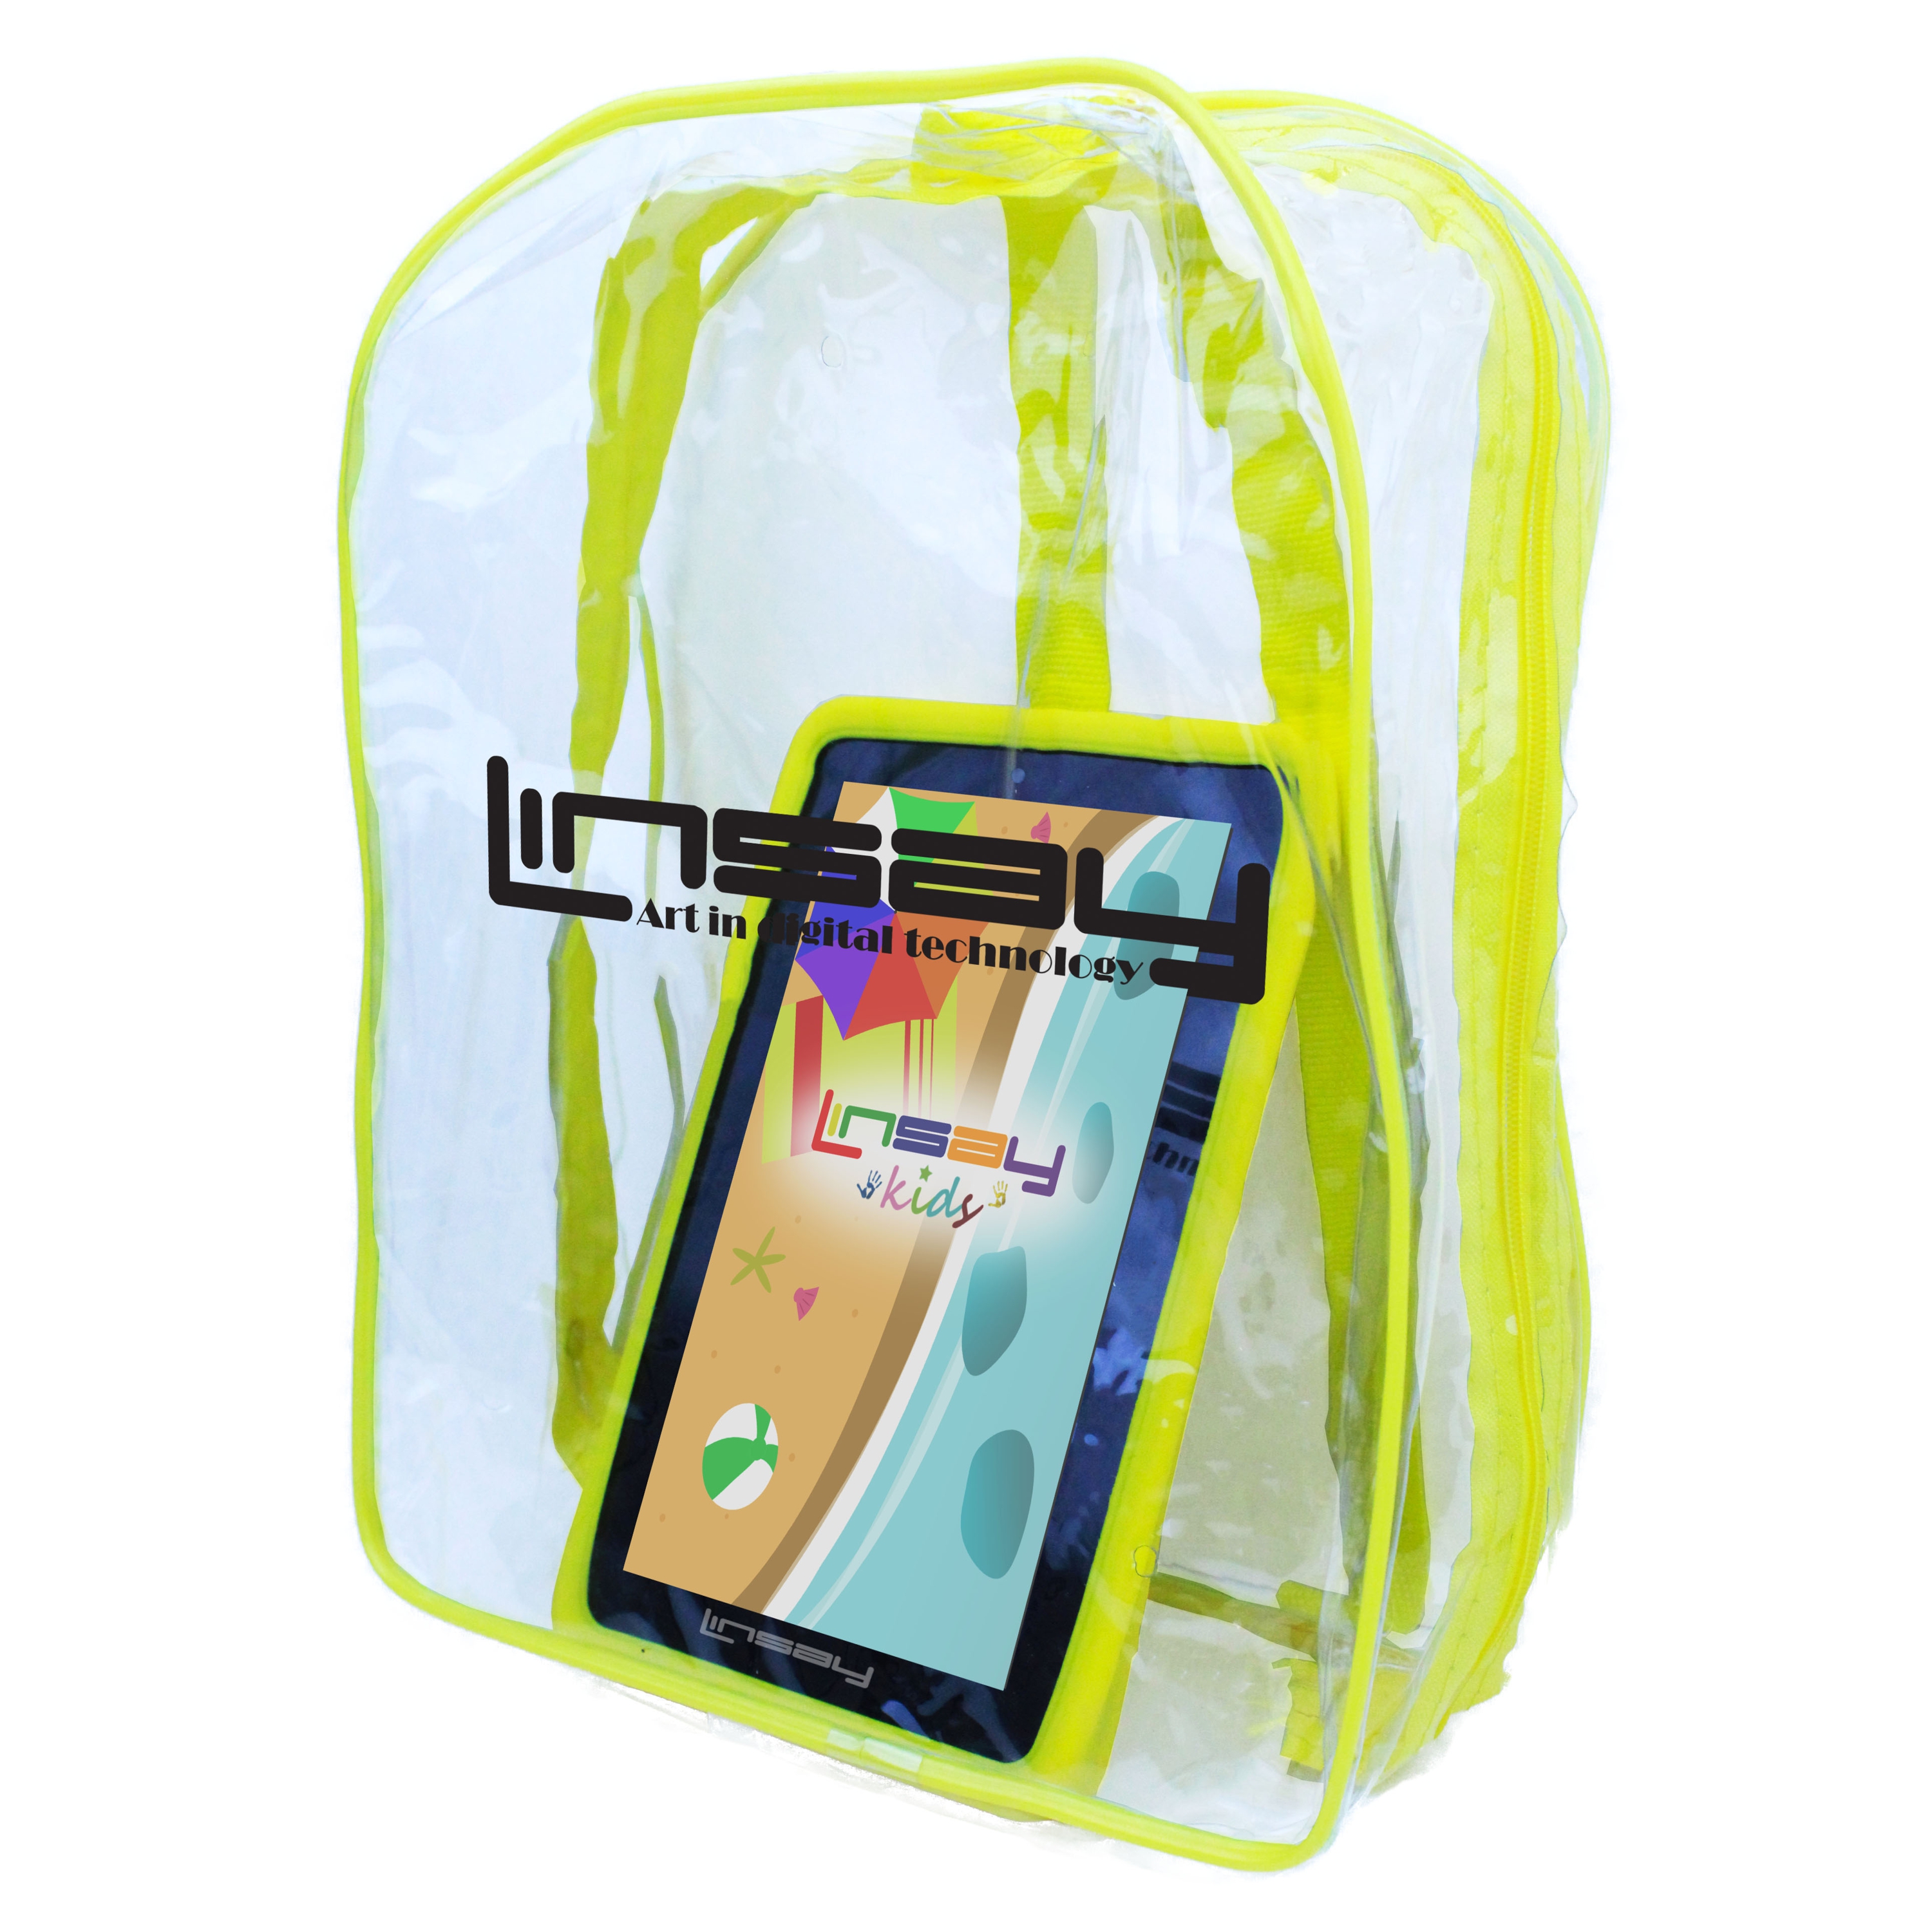 LINSAY 7" Kids Tablet 64GB Android 13 Wi-Fi  Camera, Apps, Games, Learning Tab for Children with Yellow Kid Defender Case and Backpack - image 2 of 3